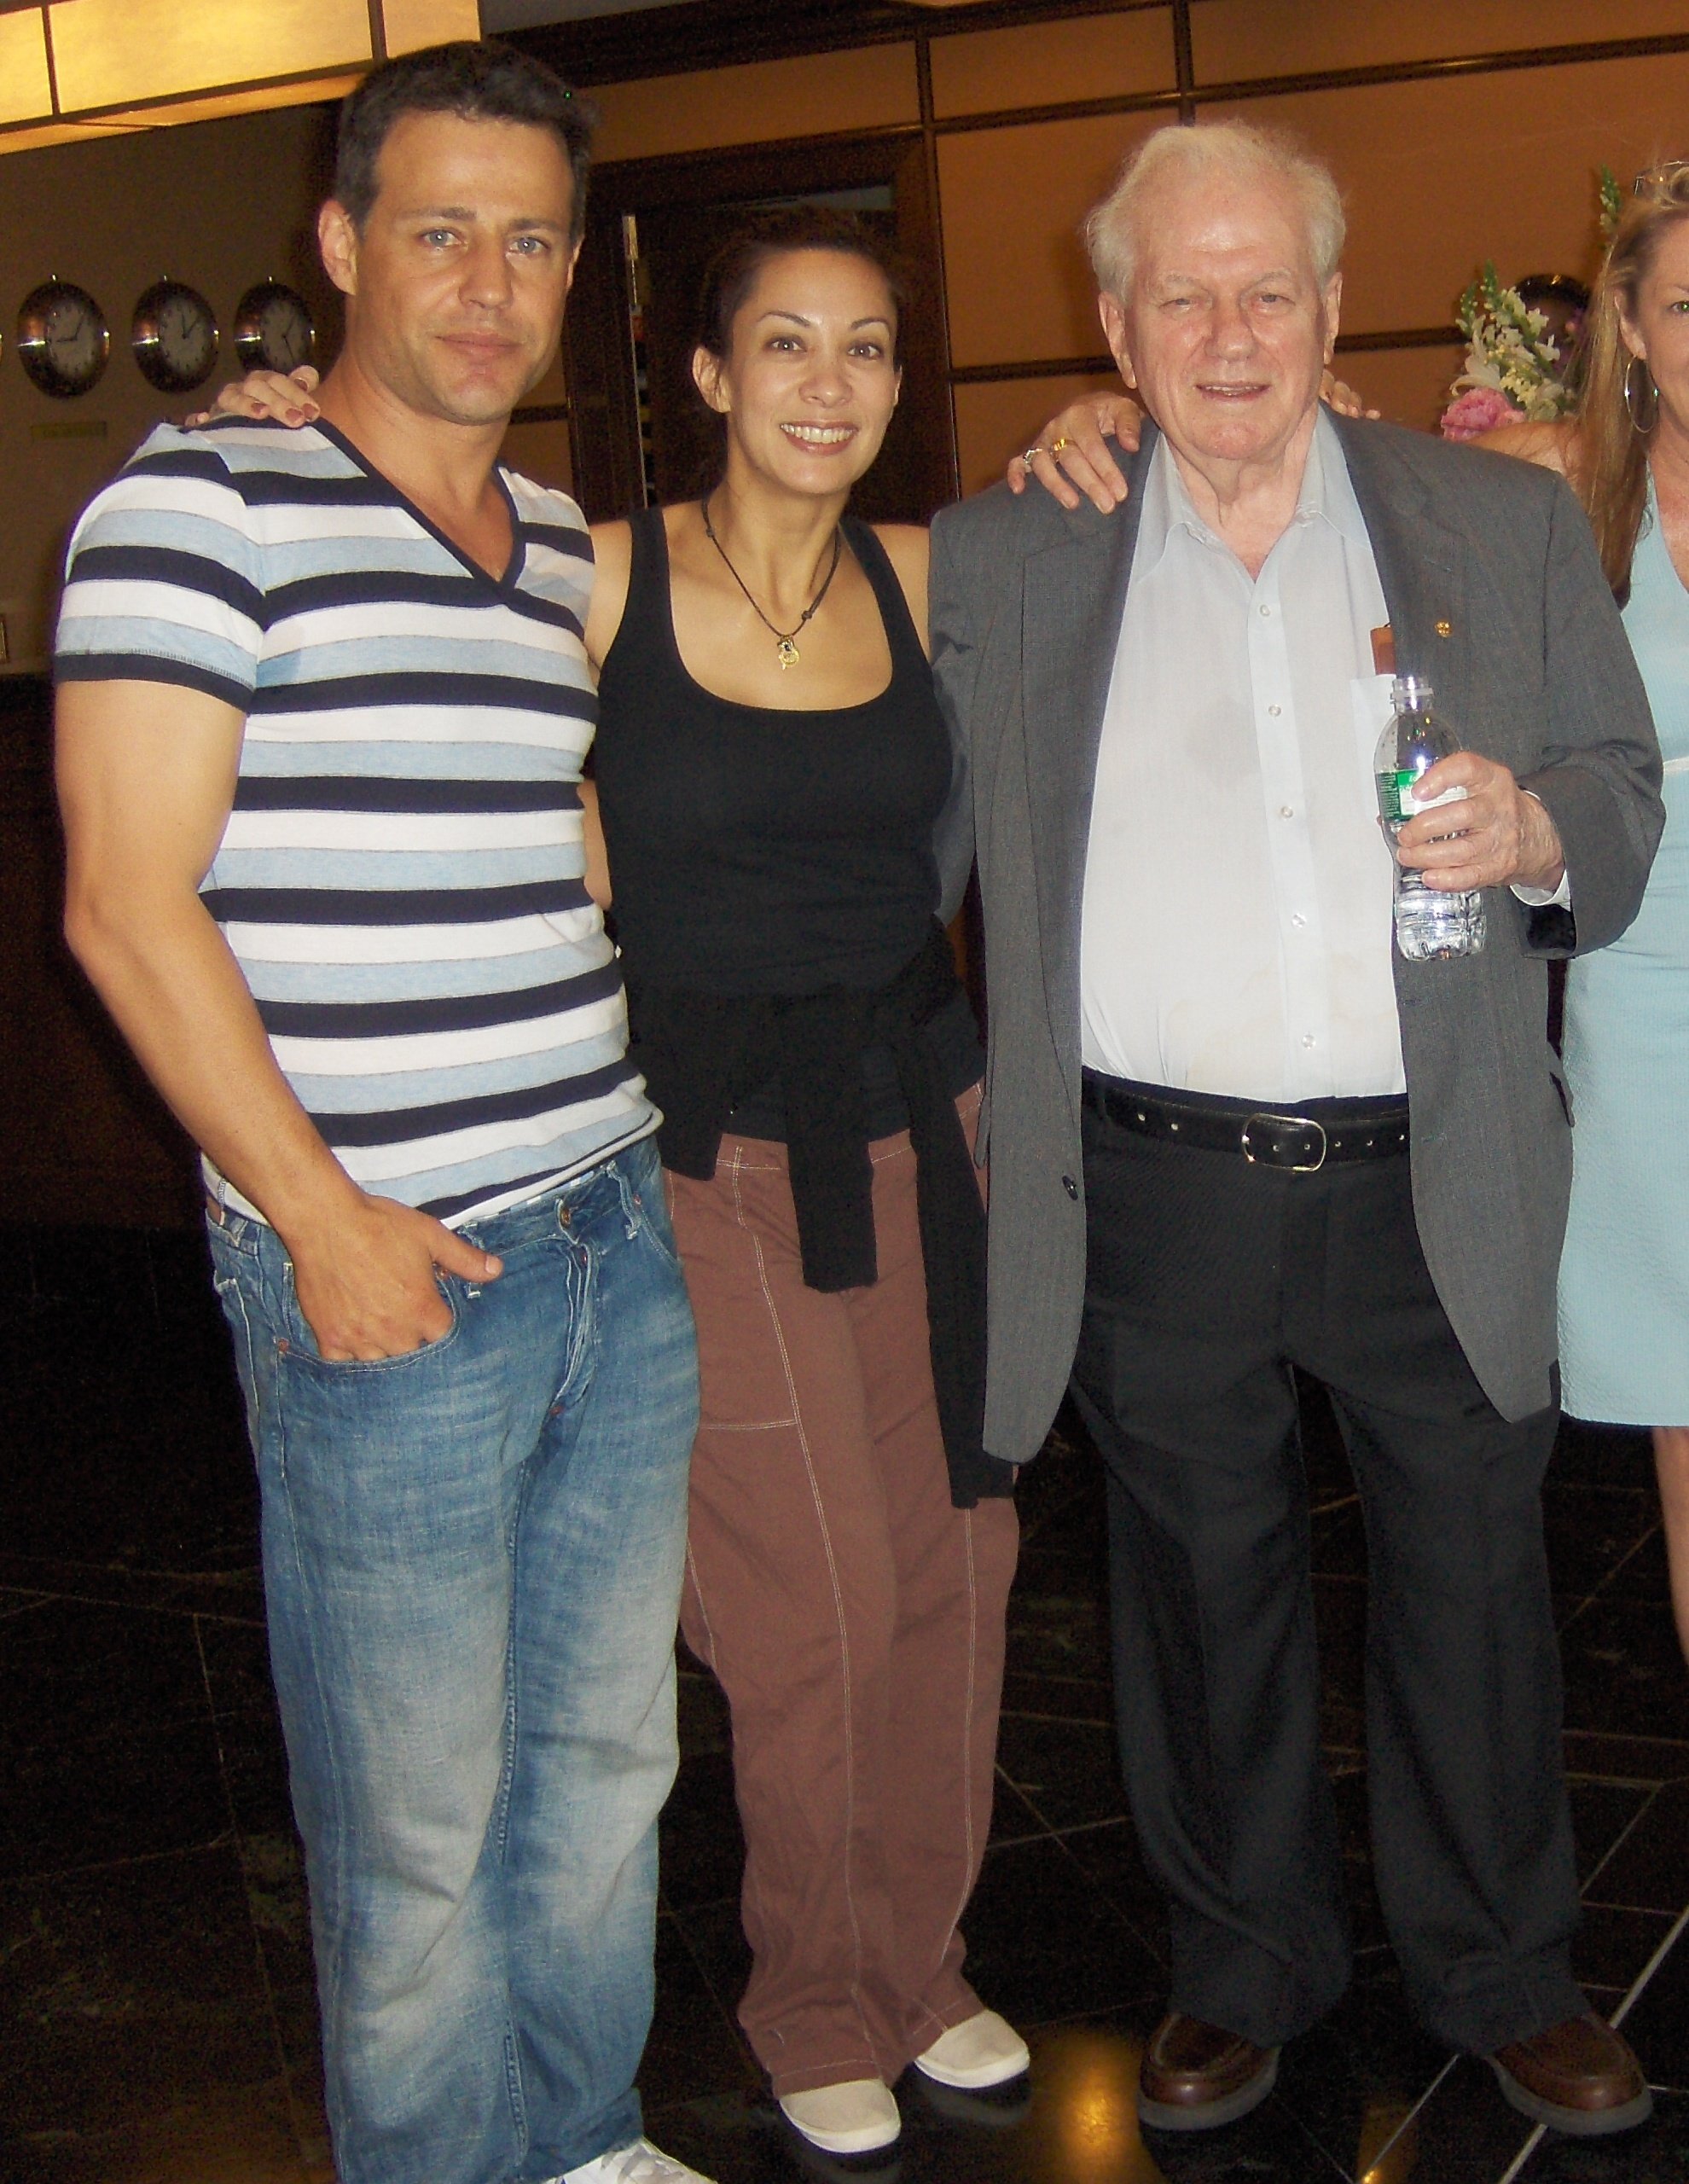 Actor - Directors, Louis Mandylor, D Lee Inosanto and actor, Charles Durning at the Hoboken International Film Festival. (New Jersey Premiere of THE SENSEI)